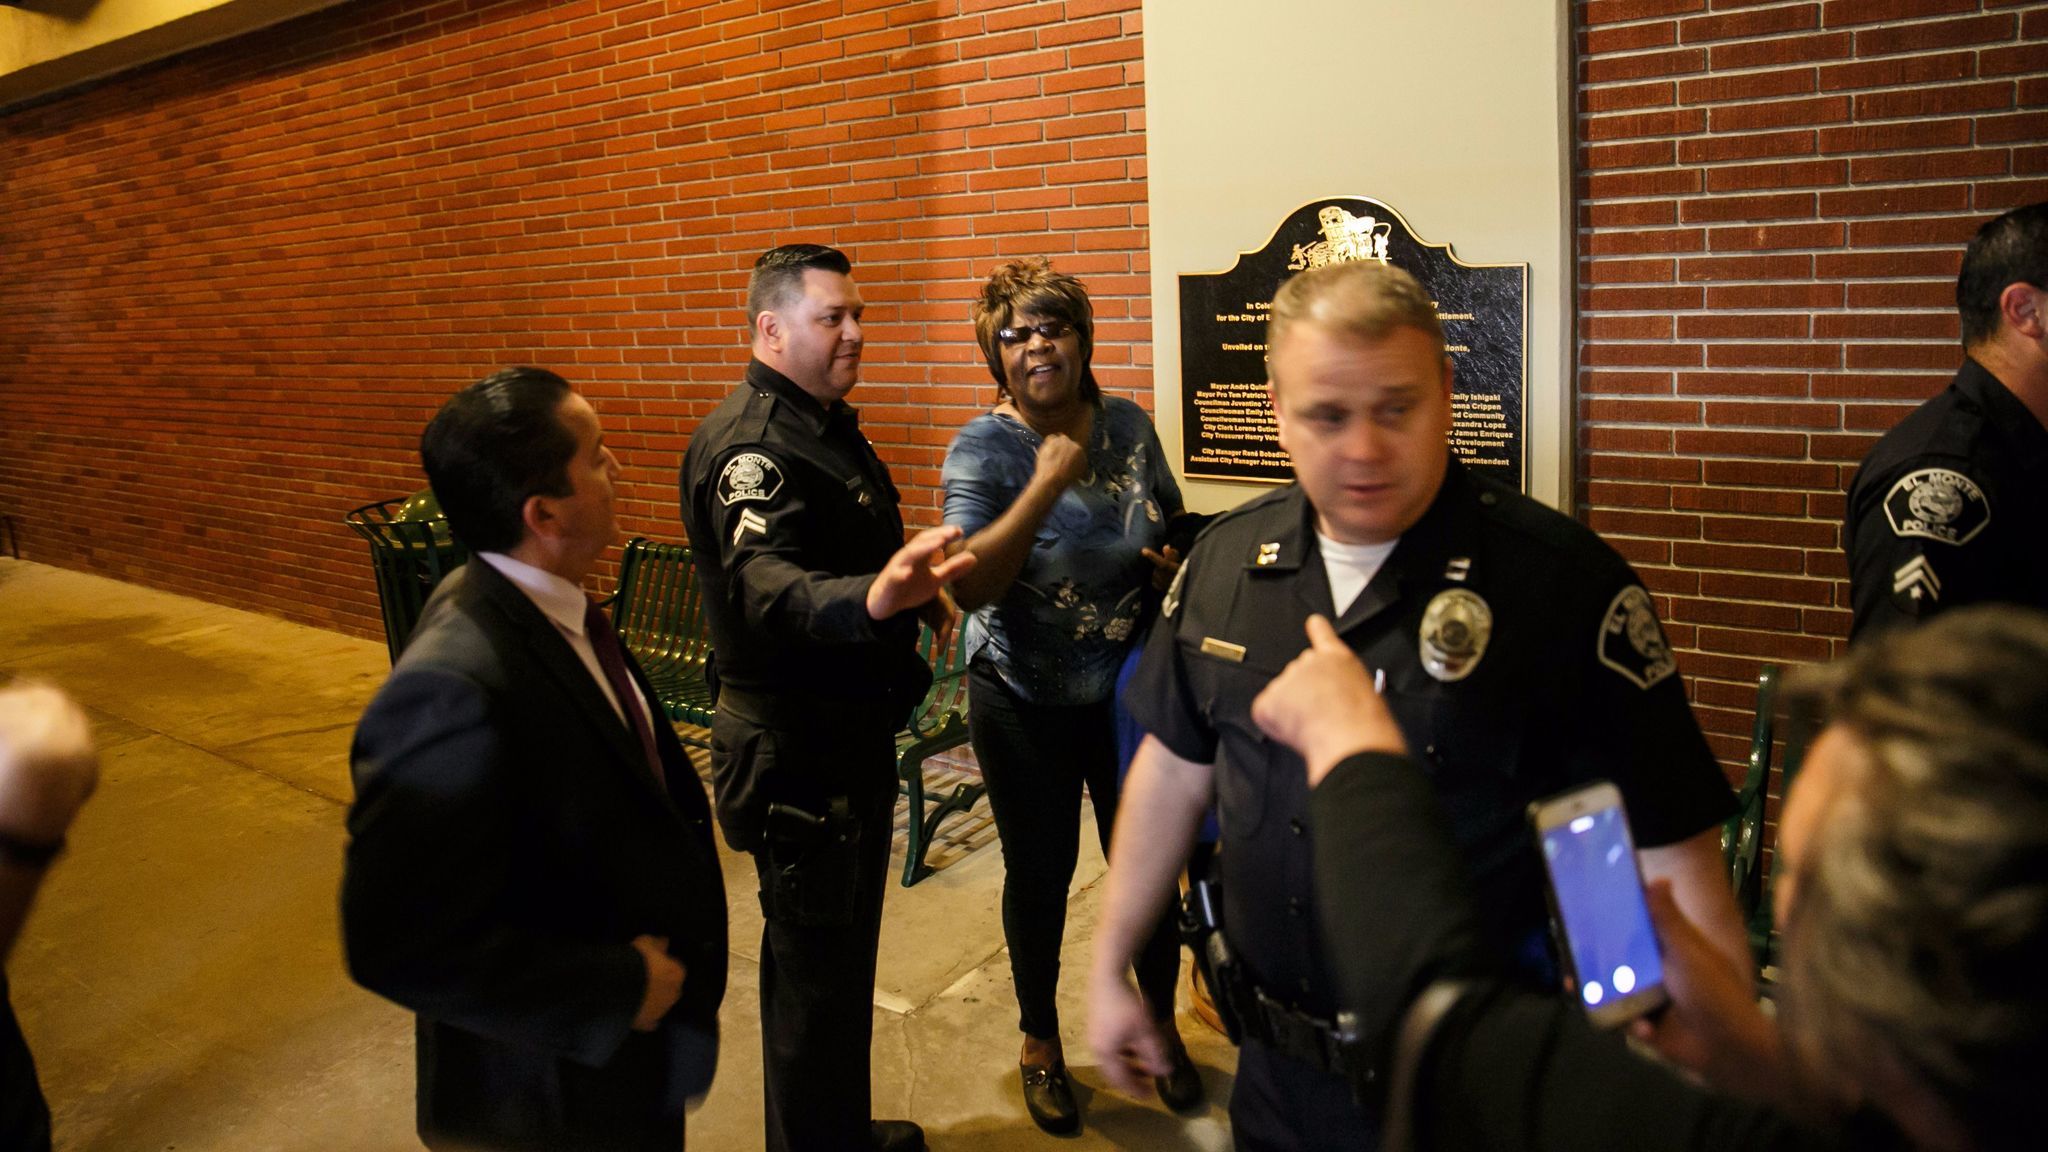 Chanell Temple is pulled aside by police after a brief scuffle broke out outside an El Monte City Council meeting on May 3. Pointing at her is El Monte resident Veronica Tomas, with back to camera.